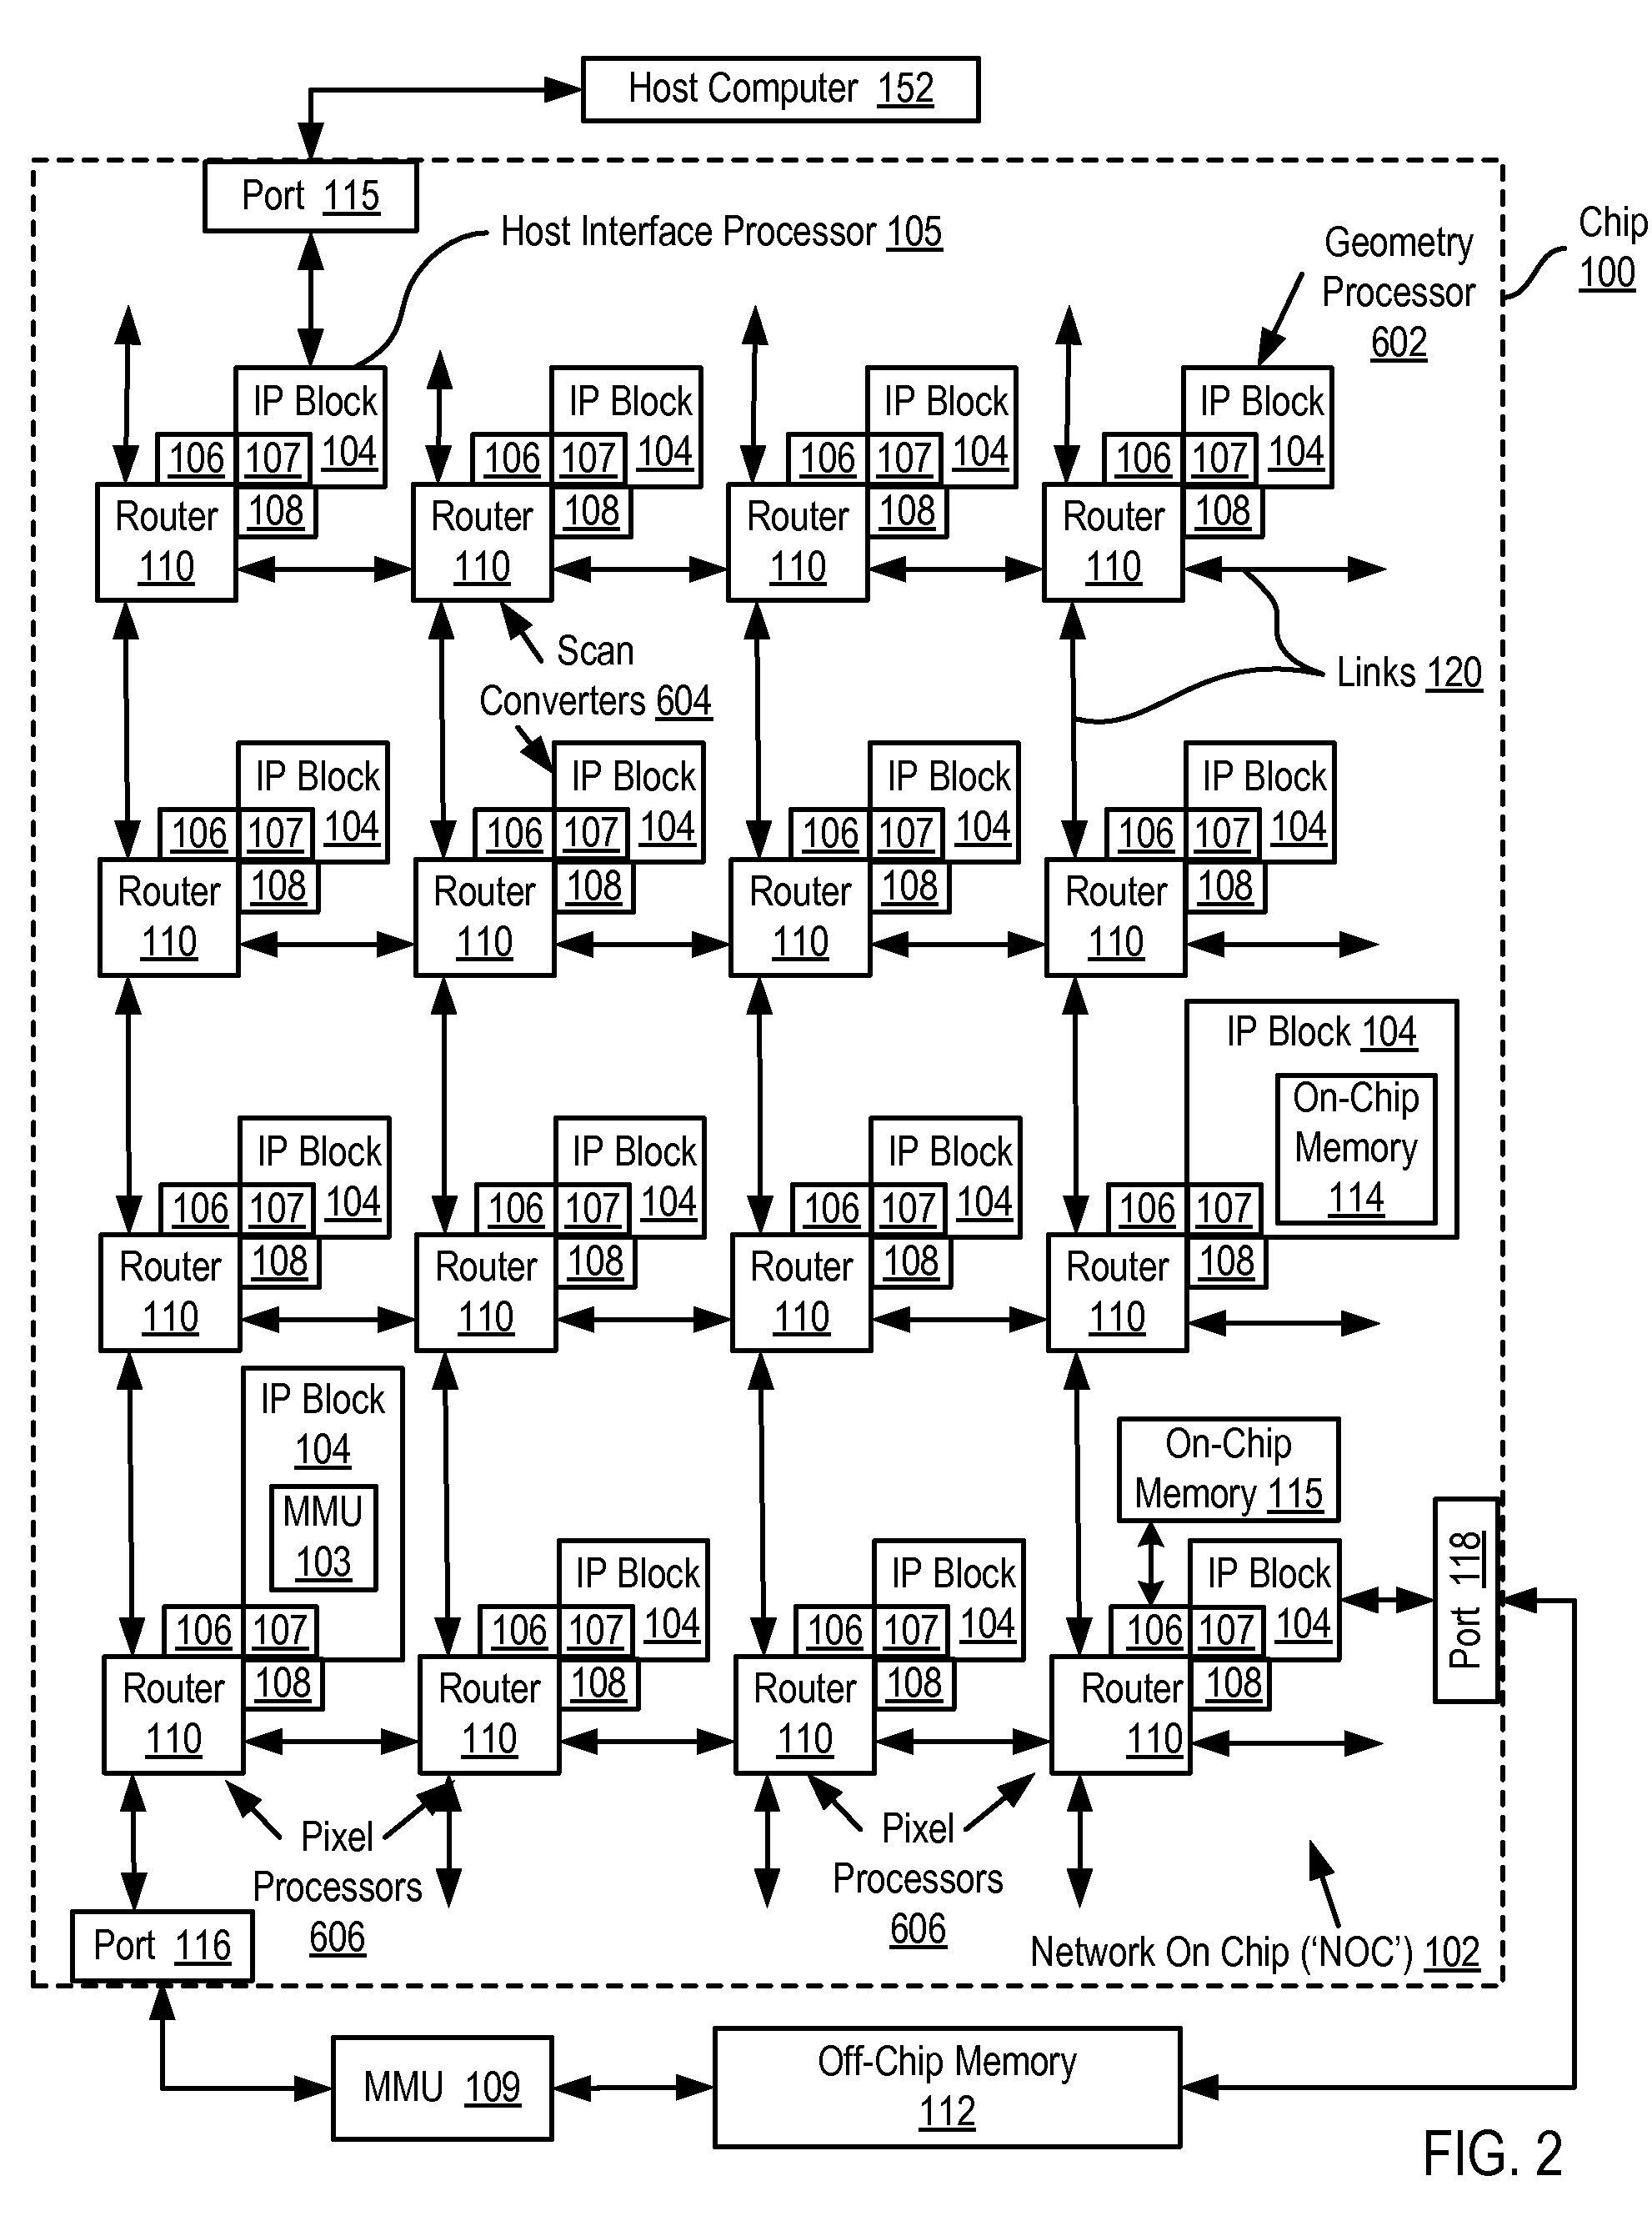 Graphics Rendering On A Network On Chip